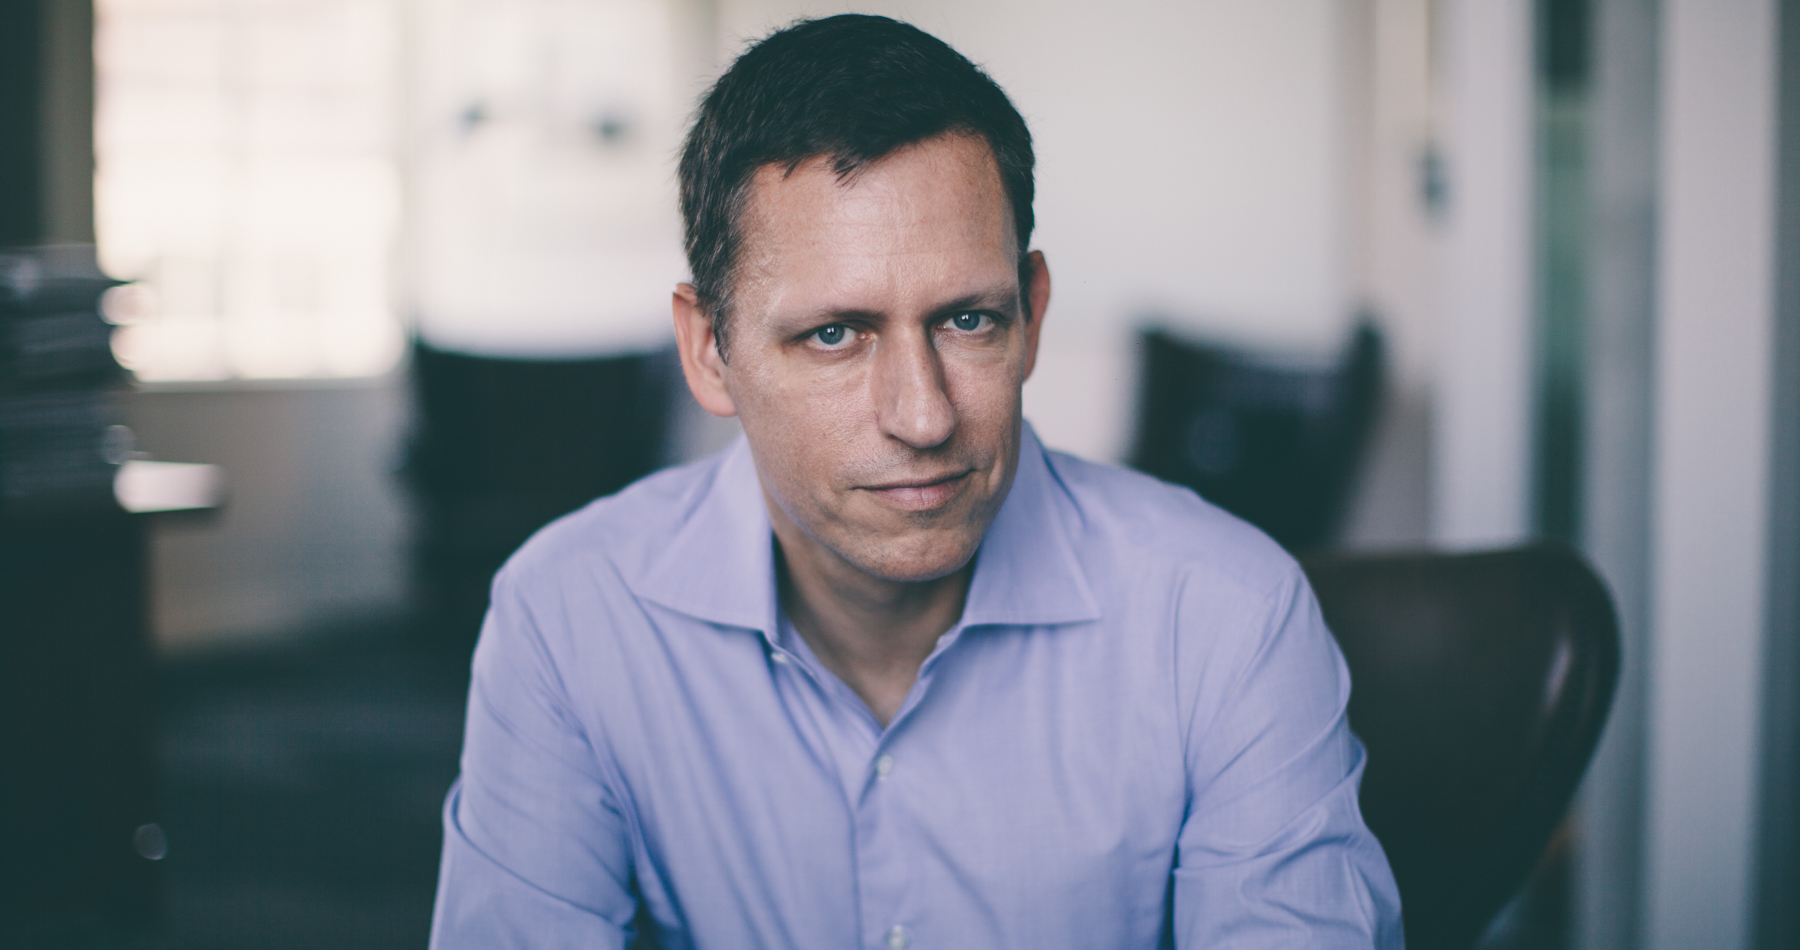 PayPal co-founder Peter Thiel